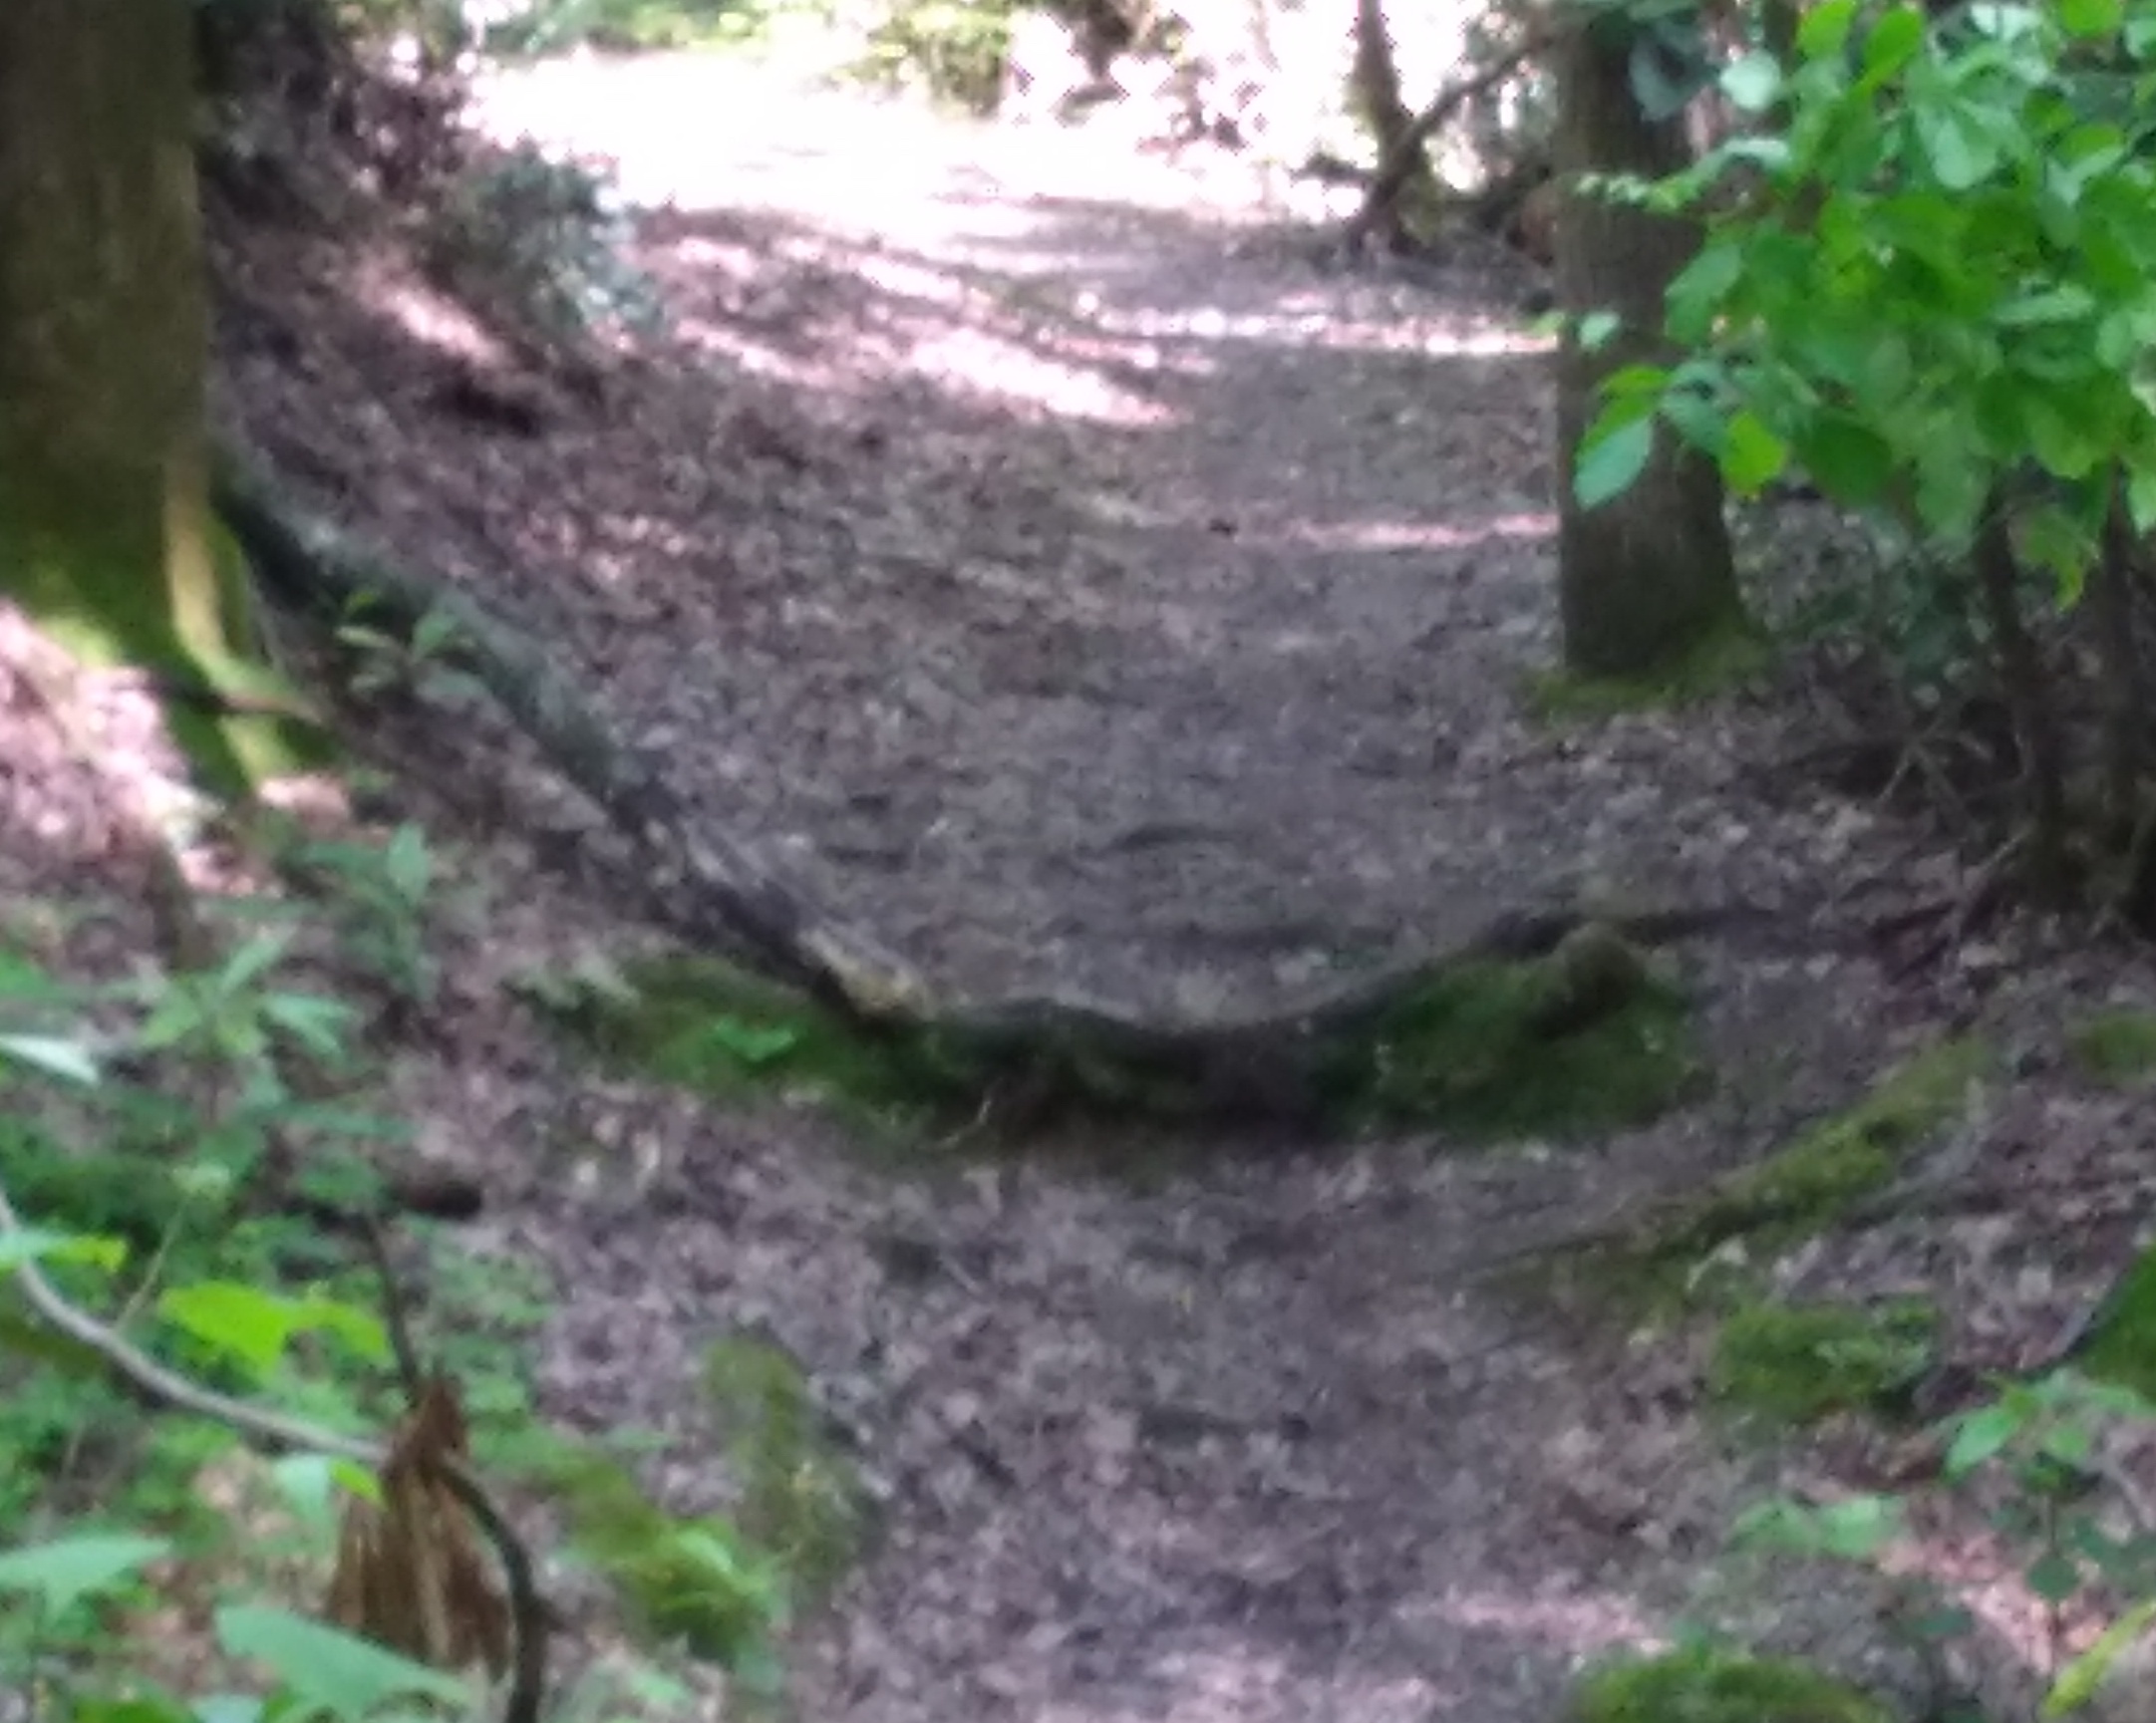 A log lays across a hiking
trail, and looks like a small alligator